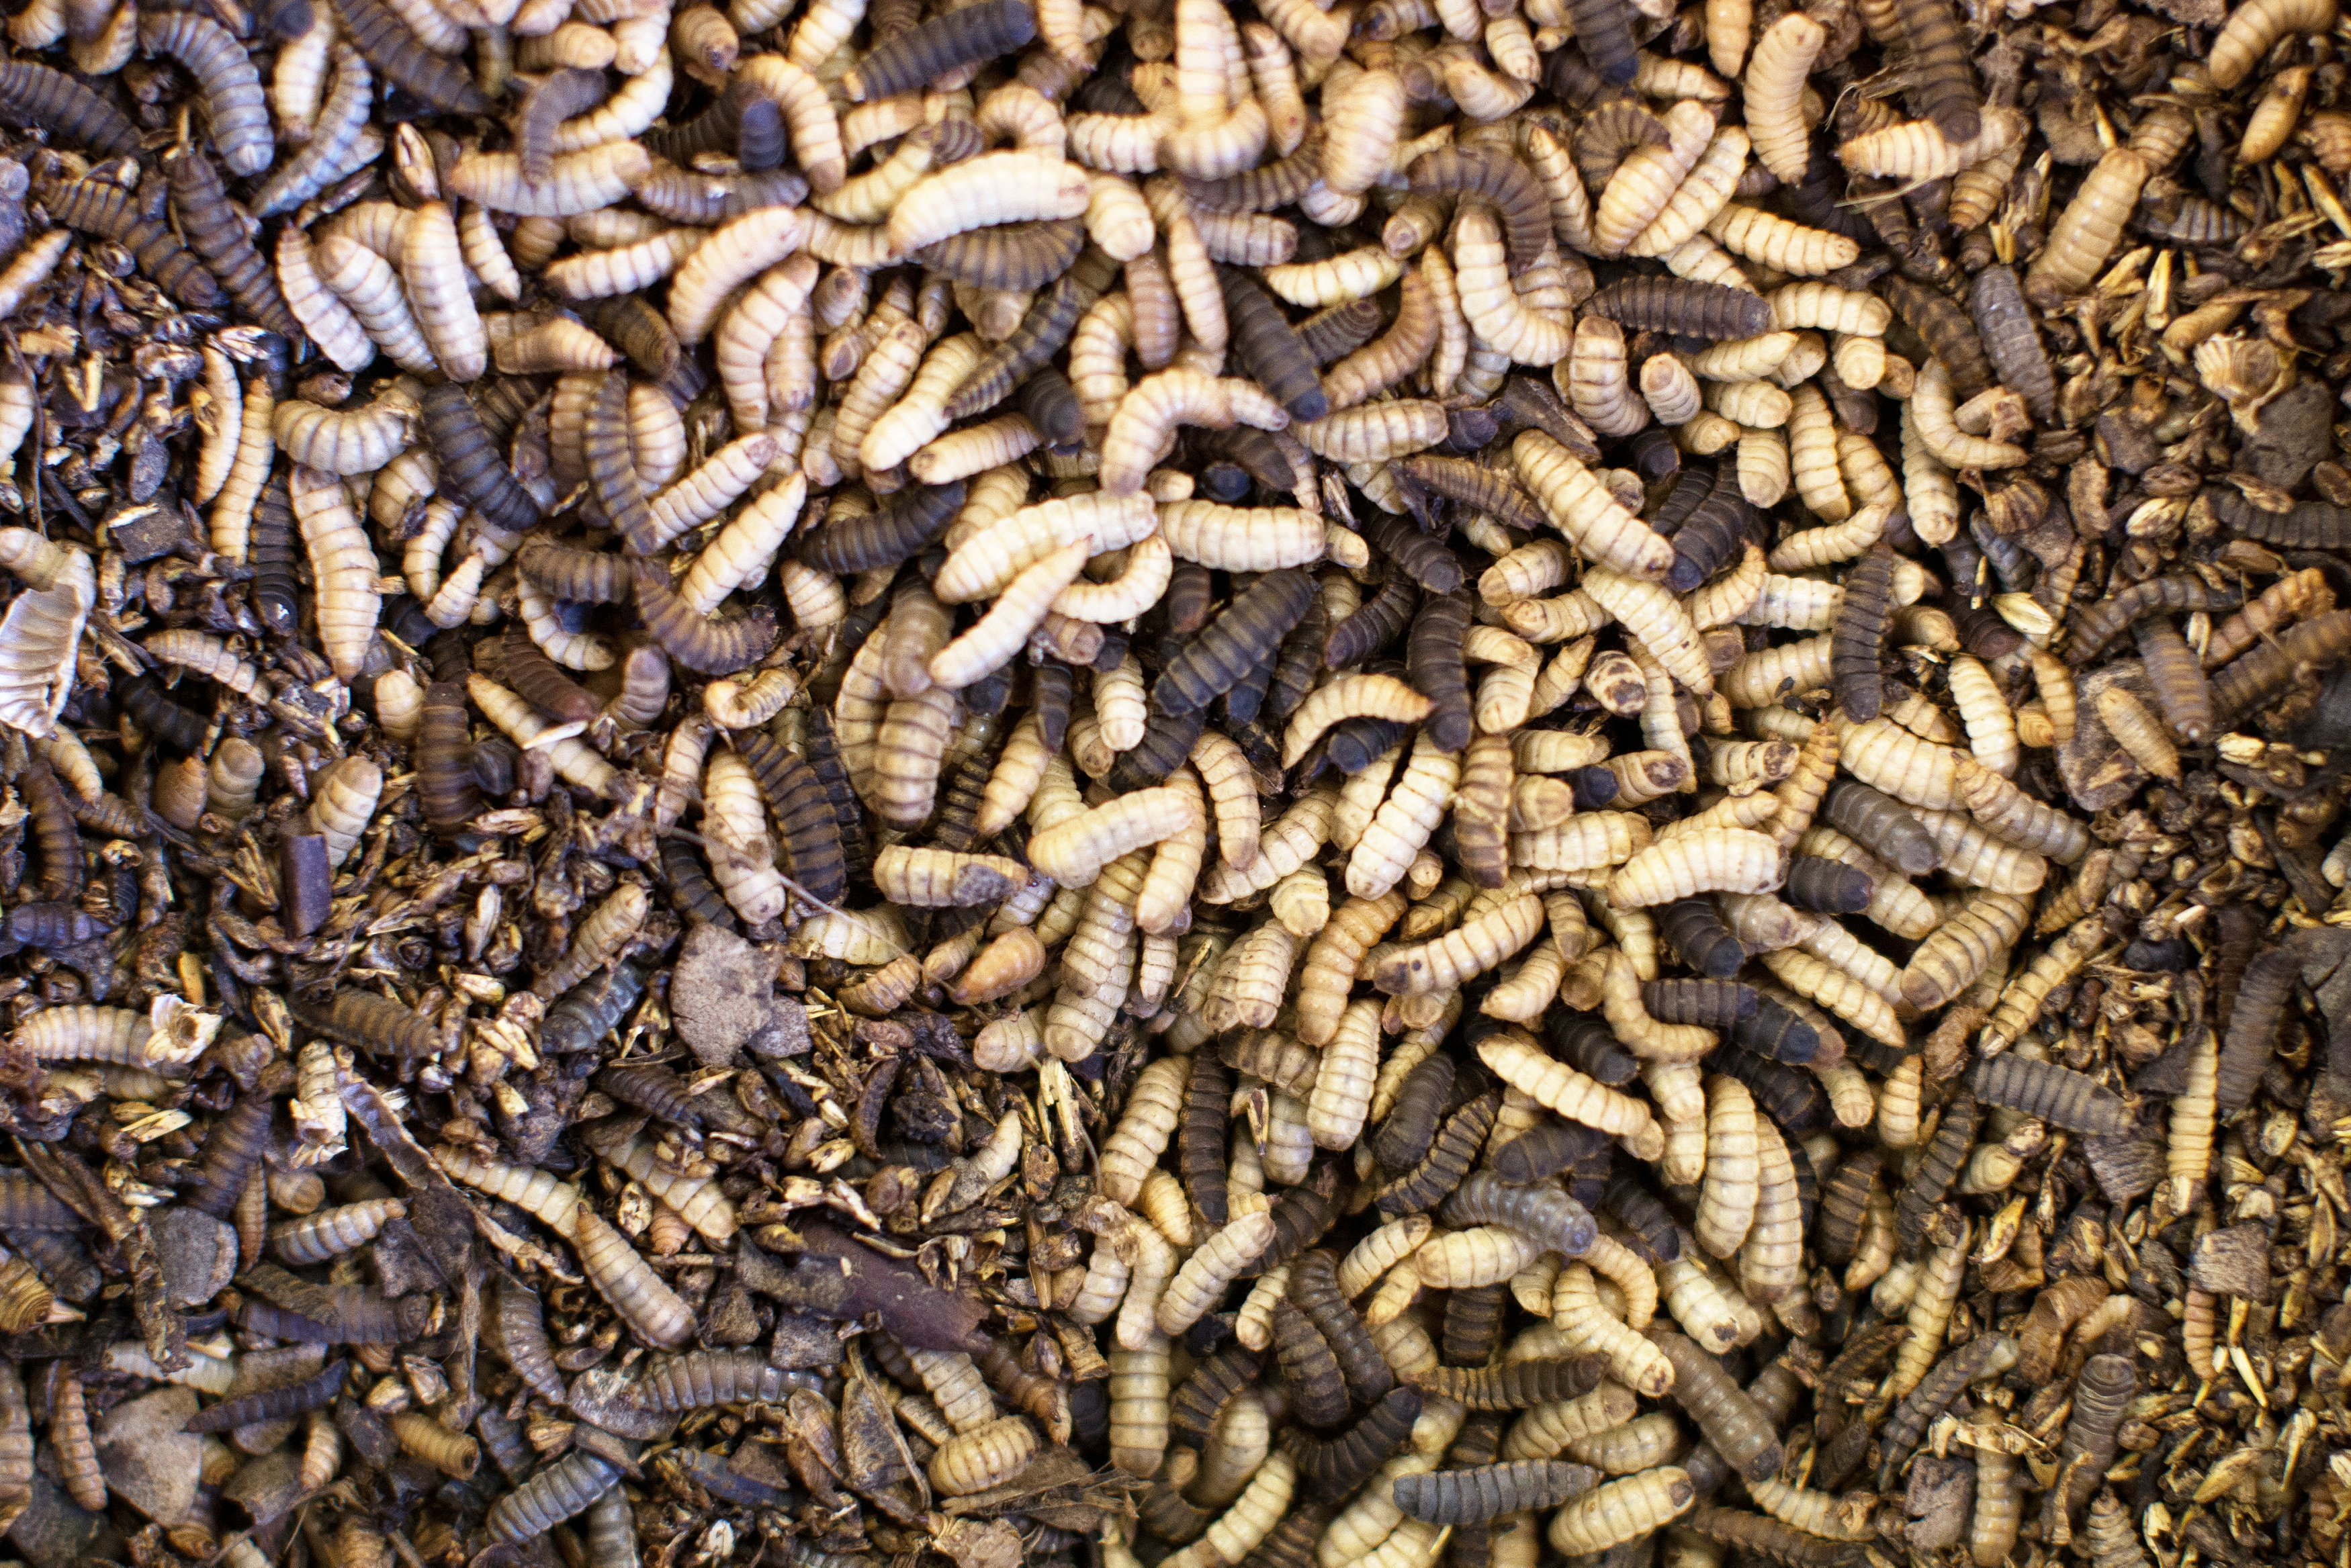 Black soldier fly larvae at the Enterra Feed Corporation in Langley, British Columbia, Canada, March 14, 2018.  Picture taken March 14, 2018.  REUTERS/Ben Nelms